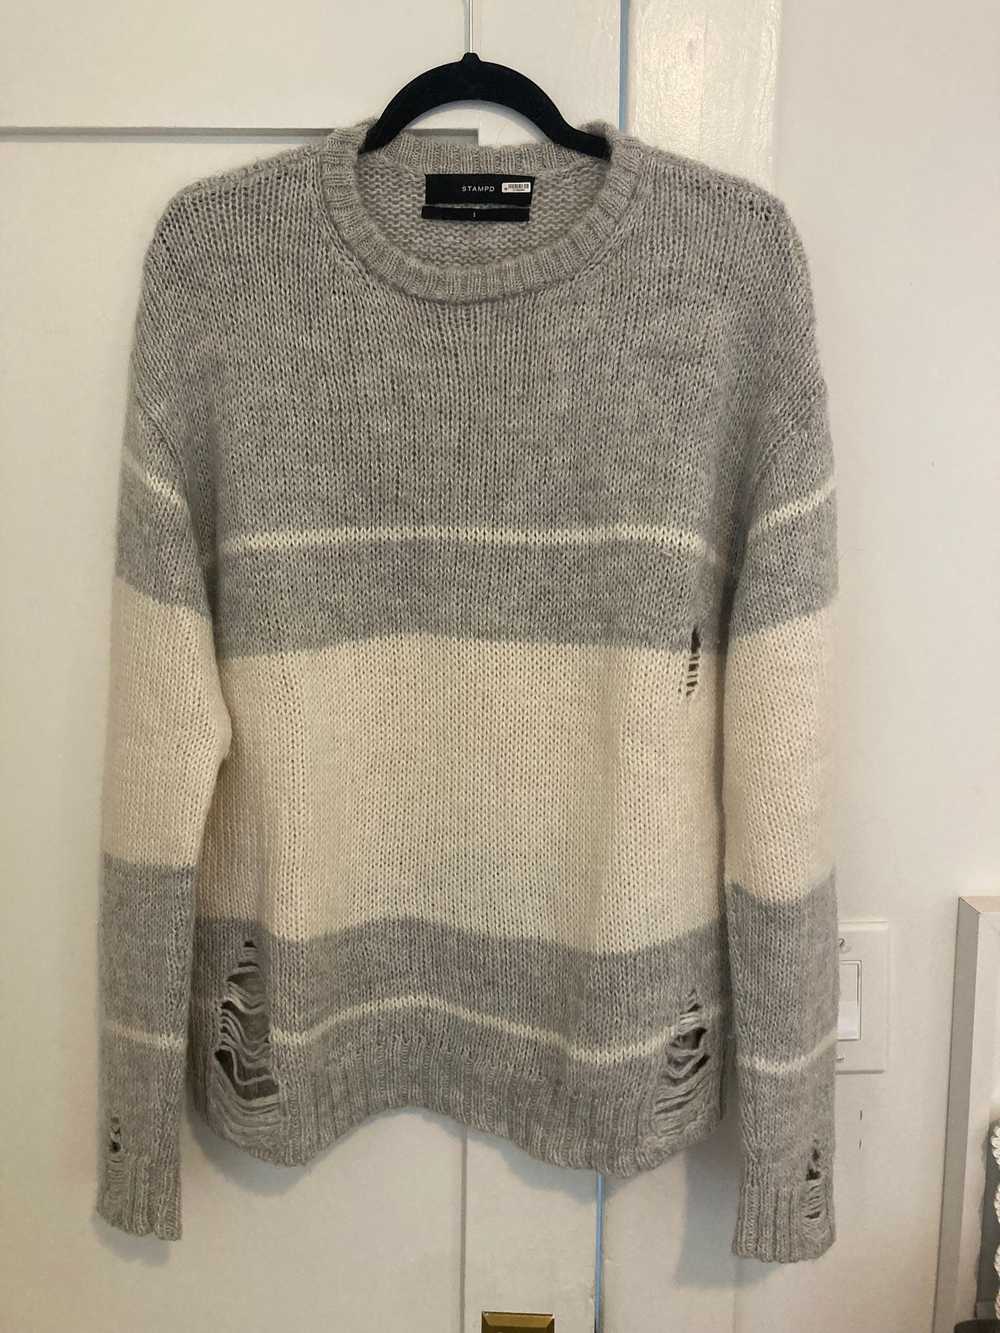 Stampd Gray Knit Sweater - image 1